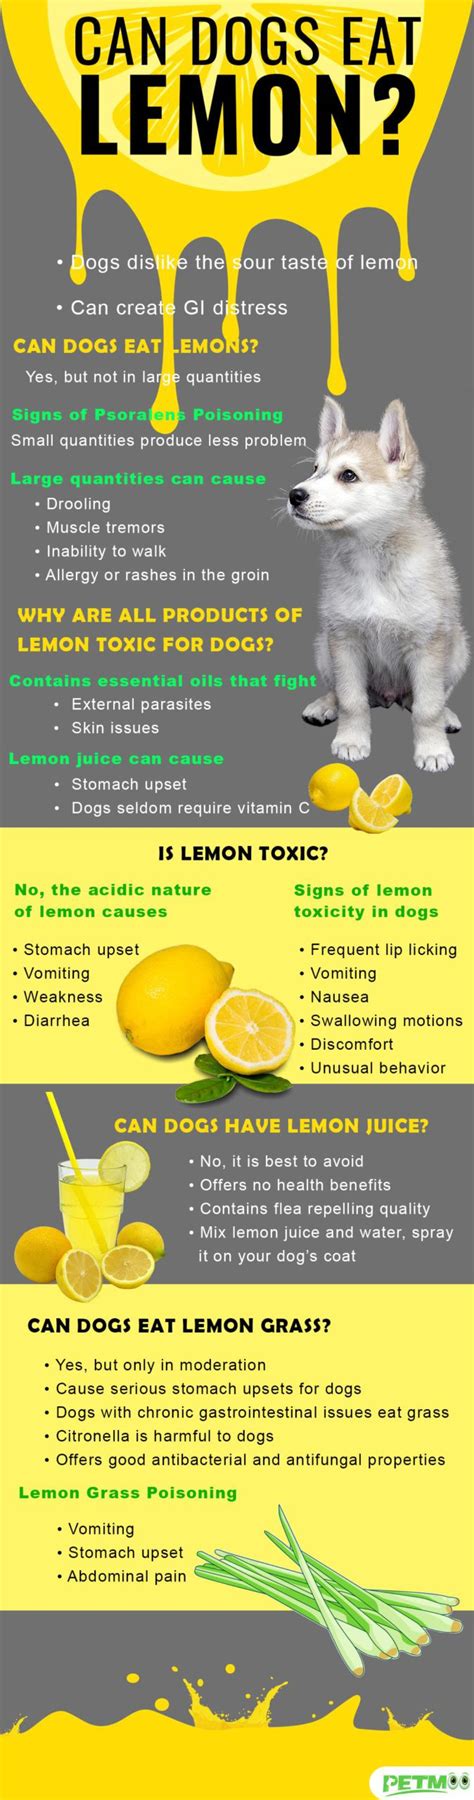 Dog ate lemon seed. Nov 6, 2023 · Lemon seeds, like the peel, contain compounds that can be harmful to dogs. If your dog ingests lemon seeds, it can lead to digestive issues and potentially cause a blockage in the gut. Always ensure that any lemons or citrus fruits you provide to your dog (if you decide to do so) are seed-free. 